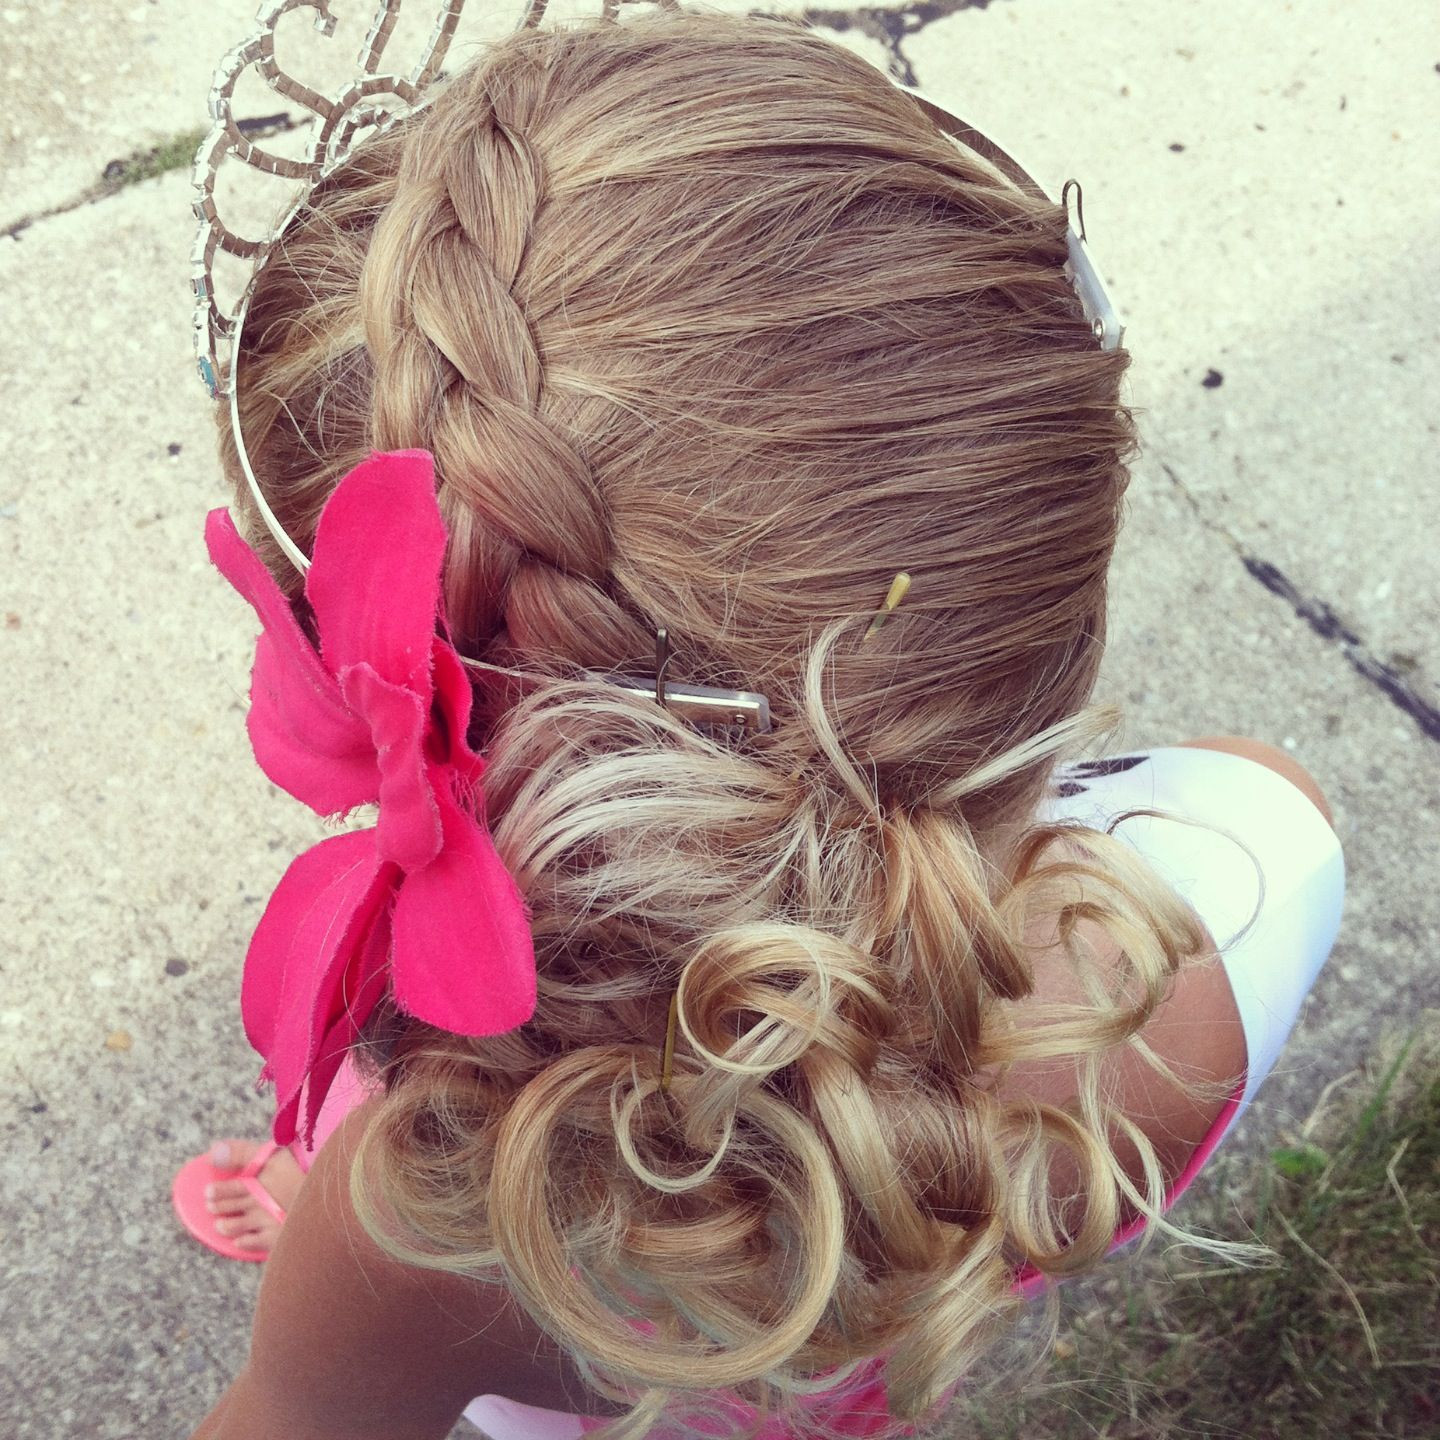 Little Girl Updo Hairstyles
 I want to do this for next school picture Just have to